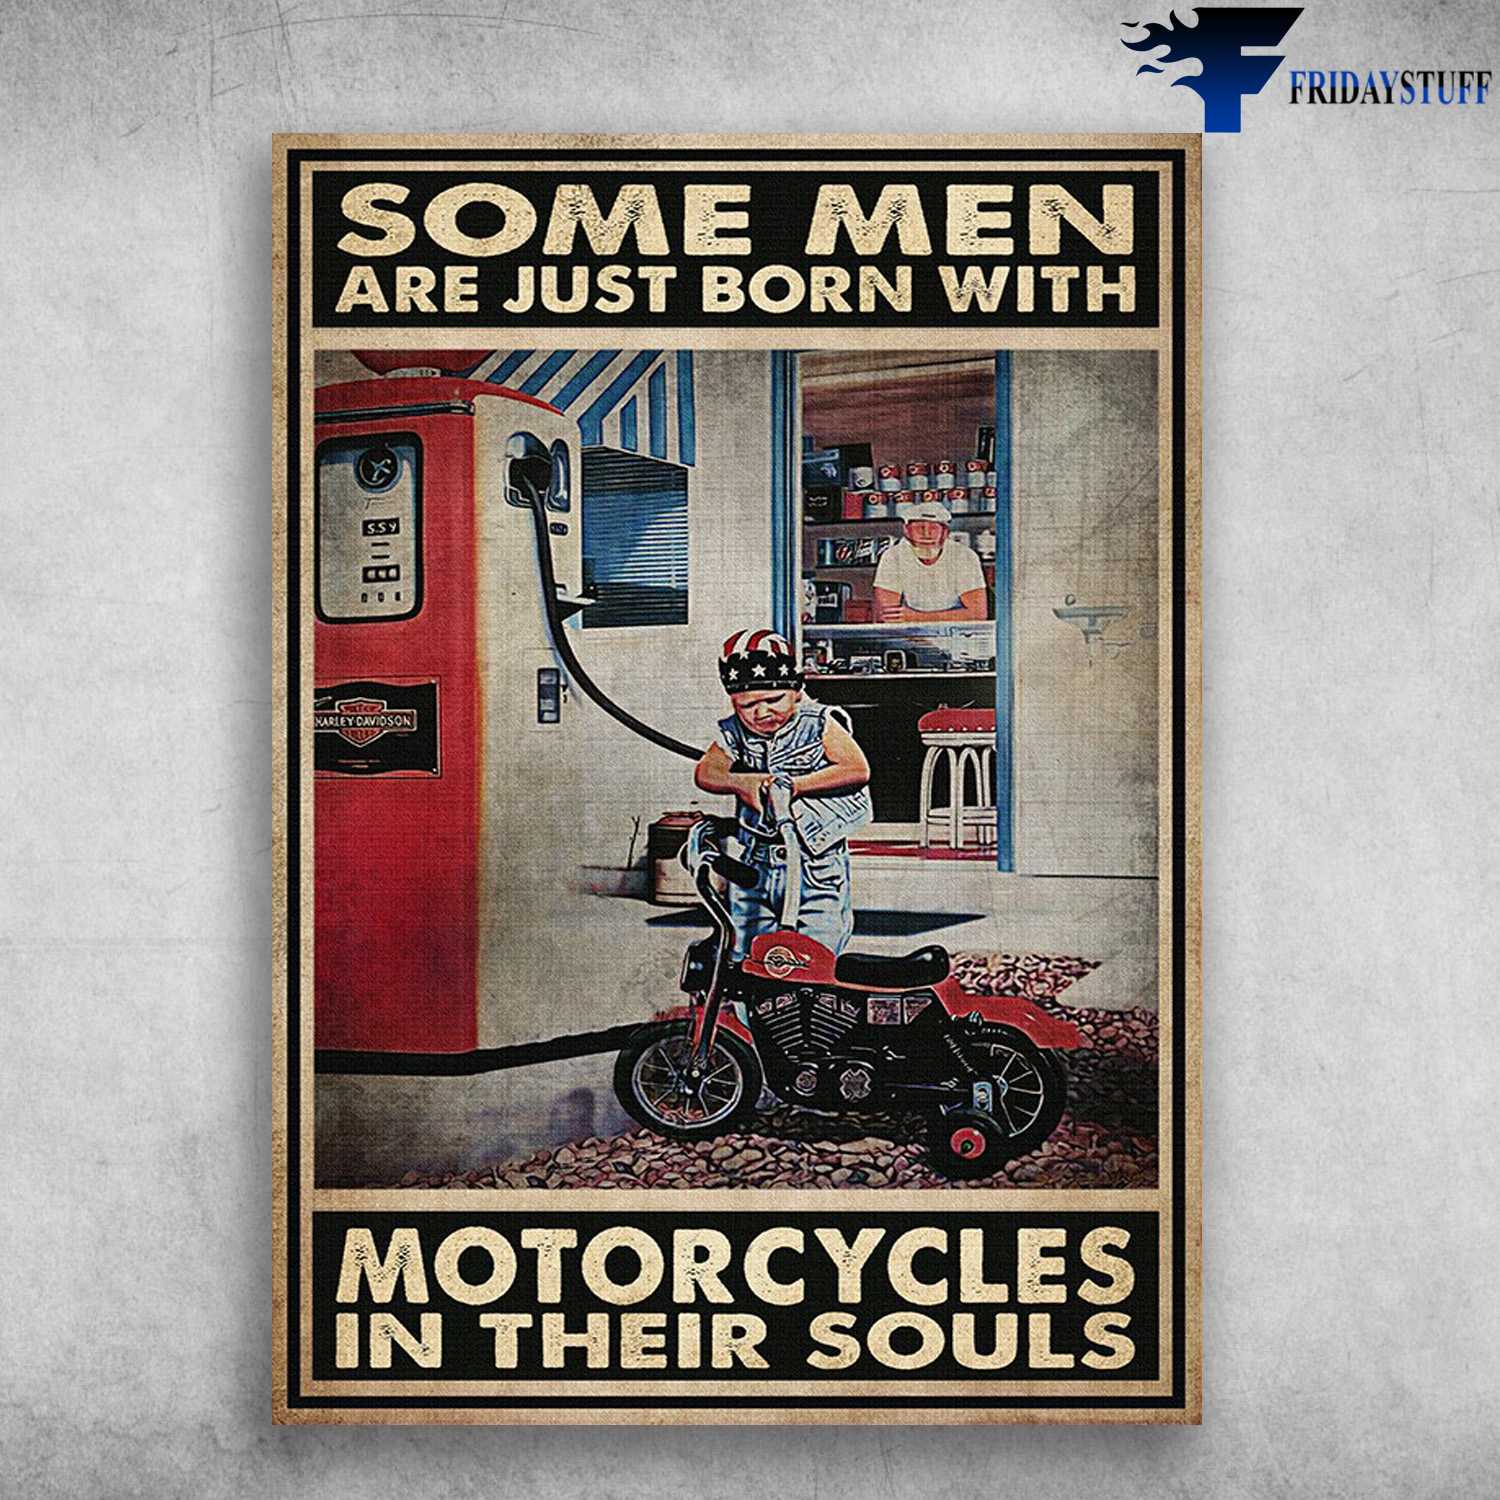 Motorcycles Boy, Biker Lover - Some Men Are Just Born With, Motorcycles In Their Souls